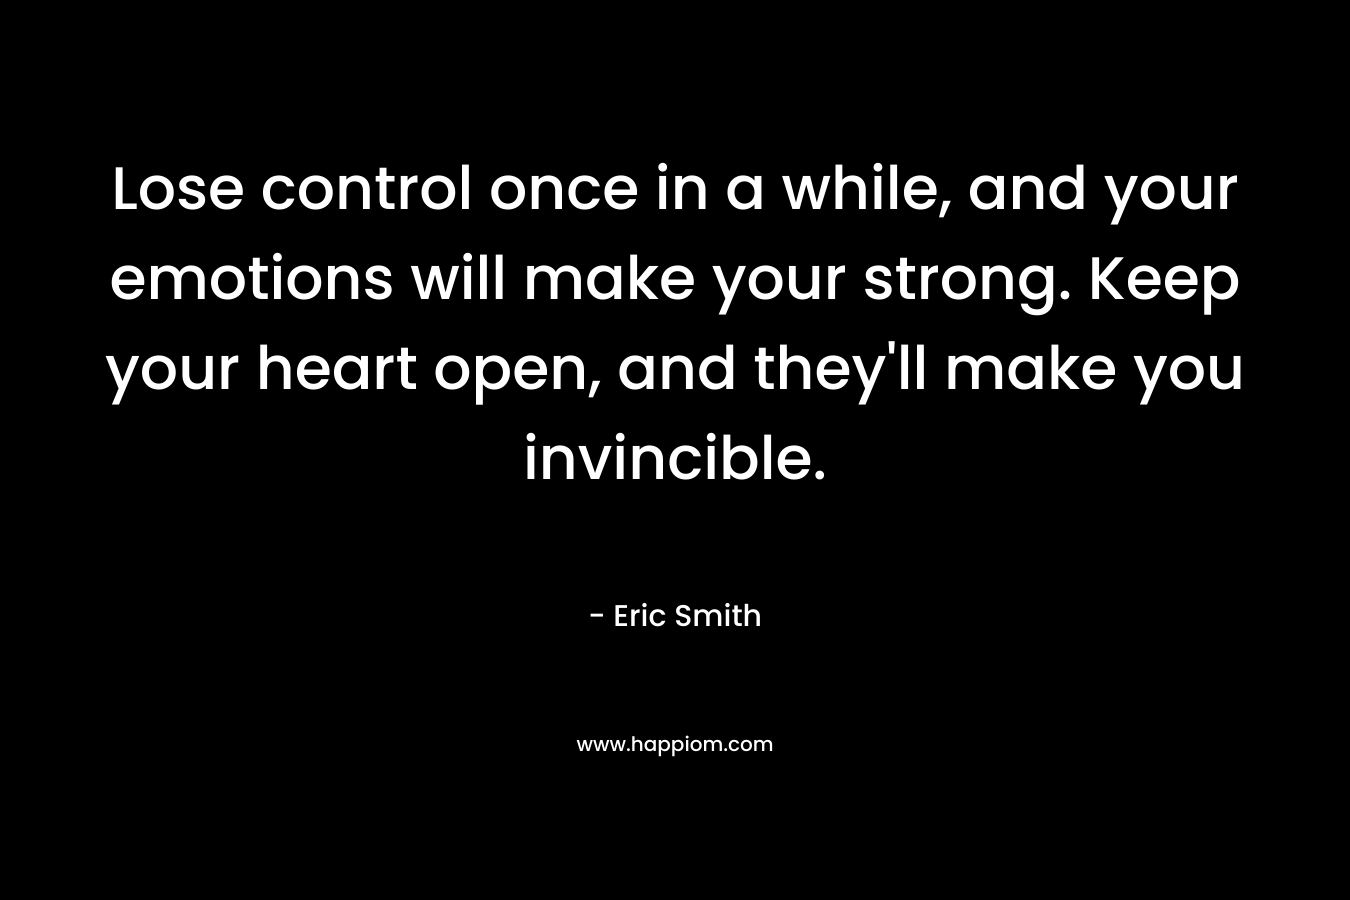 Lose control once in a while, and your emotions will make your strong. Keep your heart open, and they'll make you invincible.